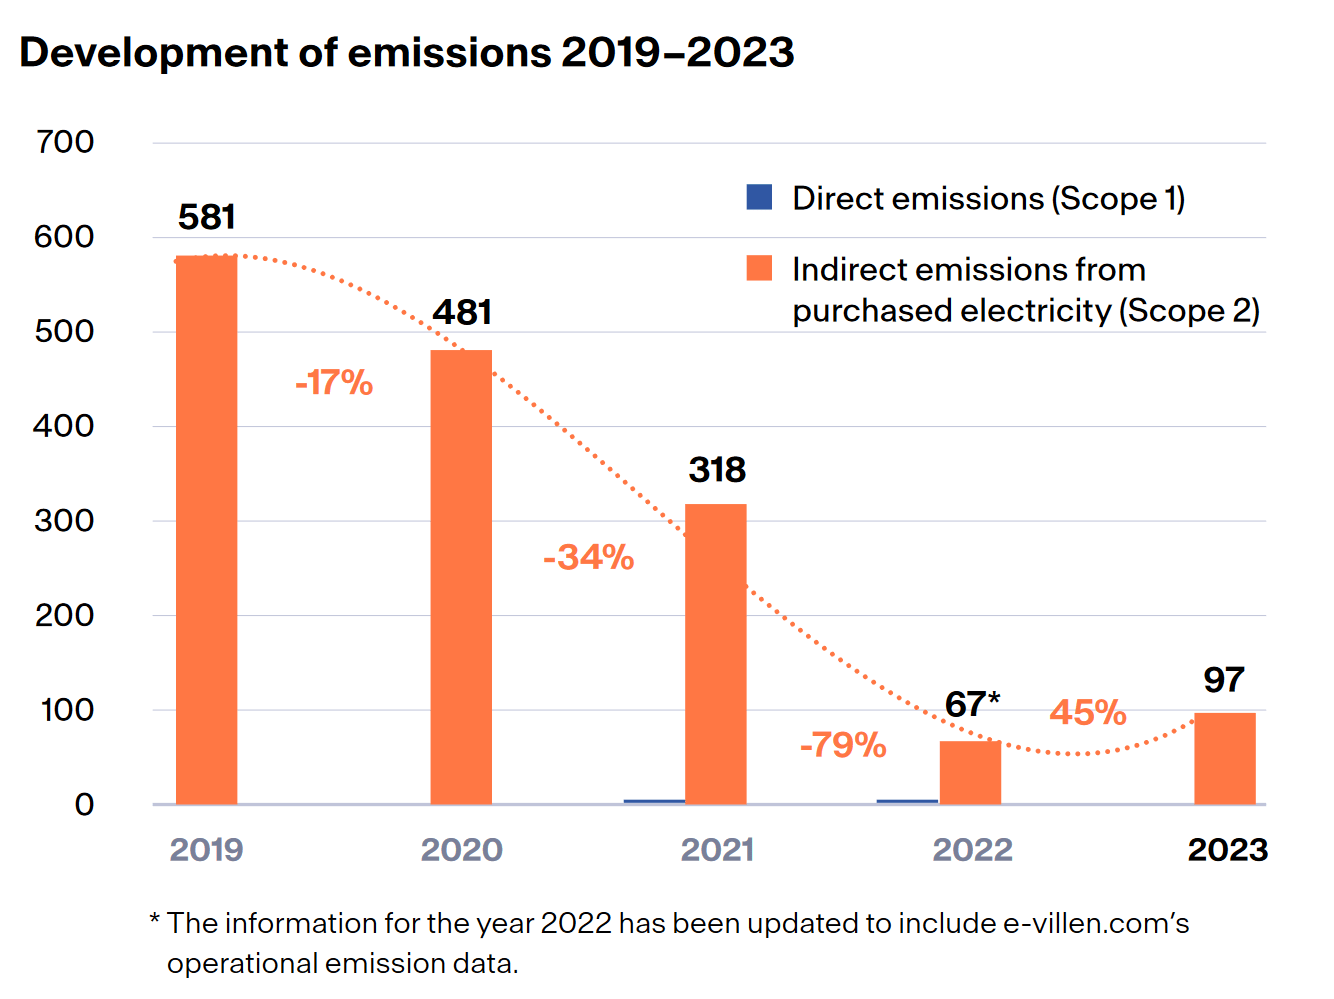 Table of deveploment of emissions 2019-2022